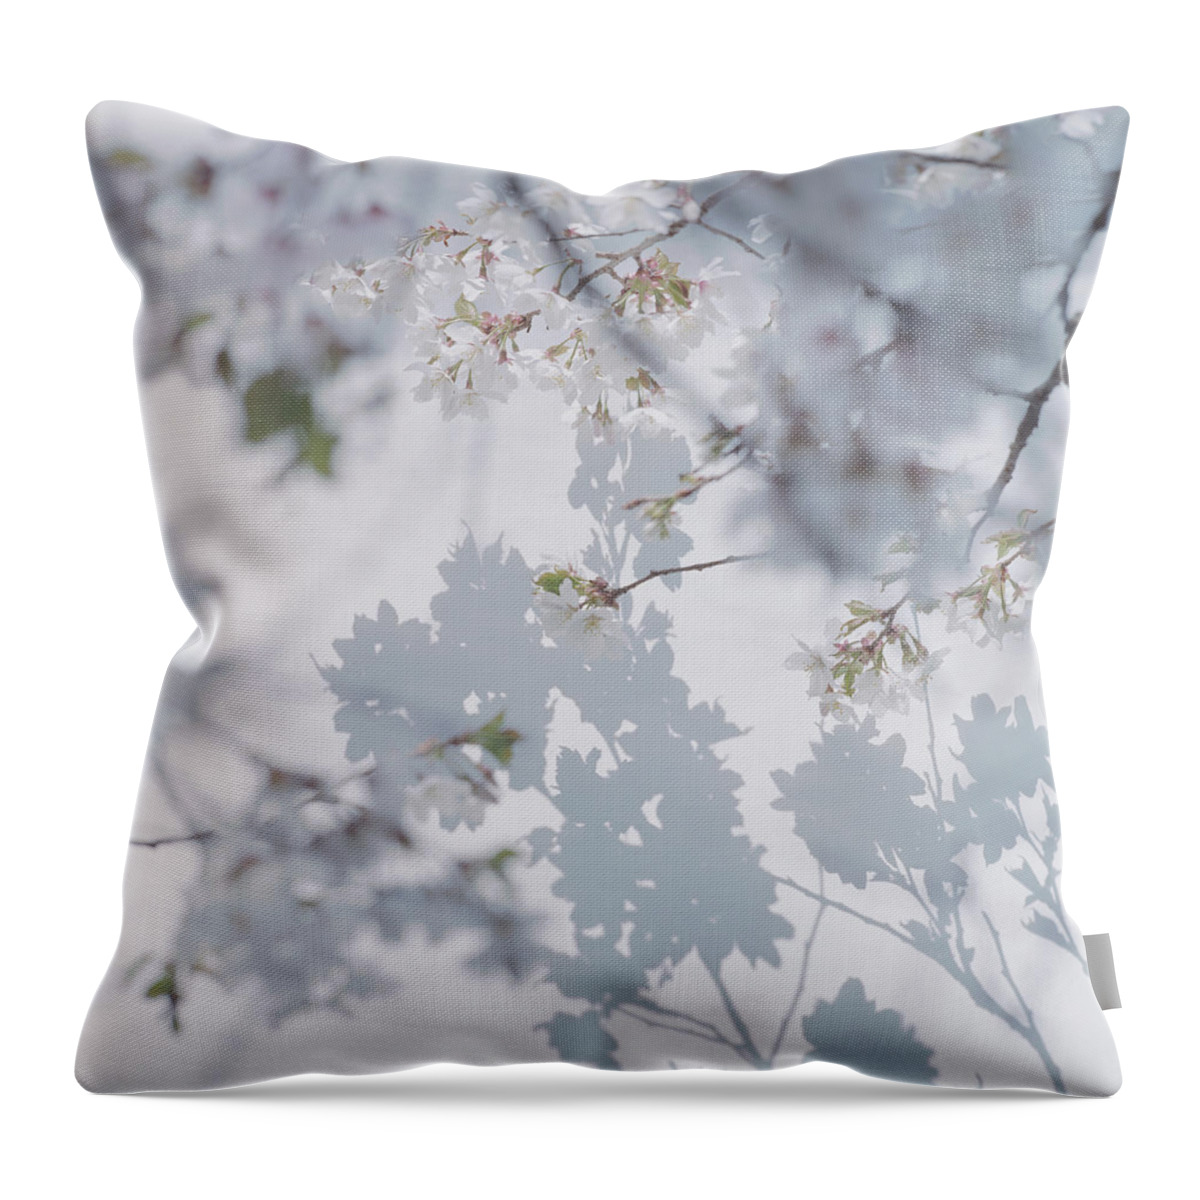 Shadow Throw Pillow featuring the photograph Shadow Of Cherry Blossoms On Wall With by Eriko Koga